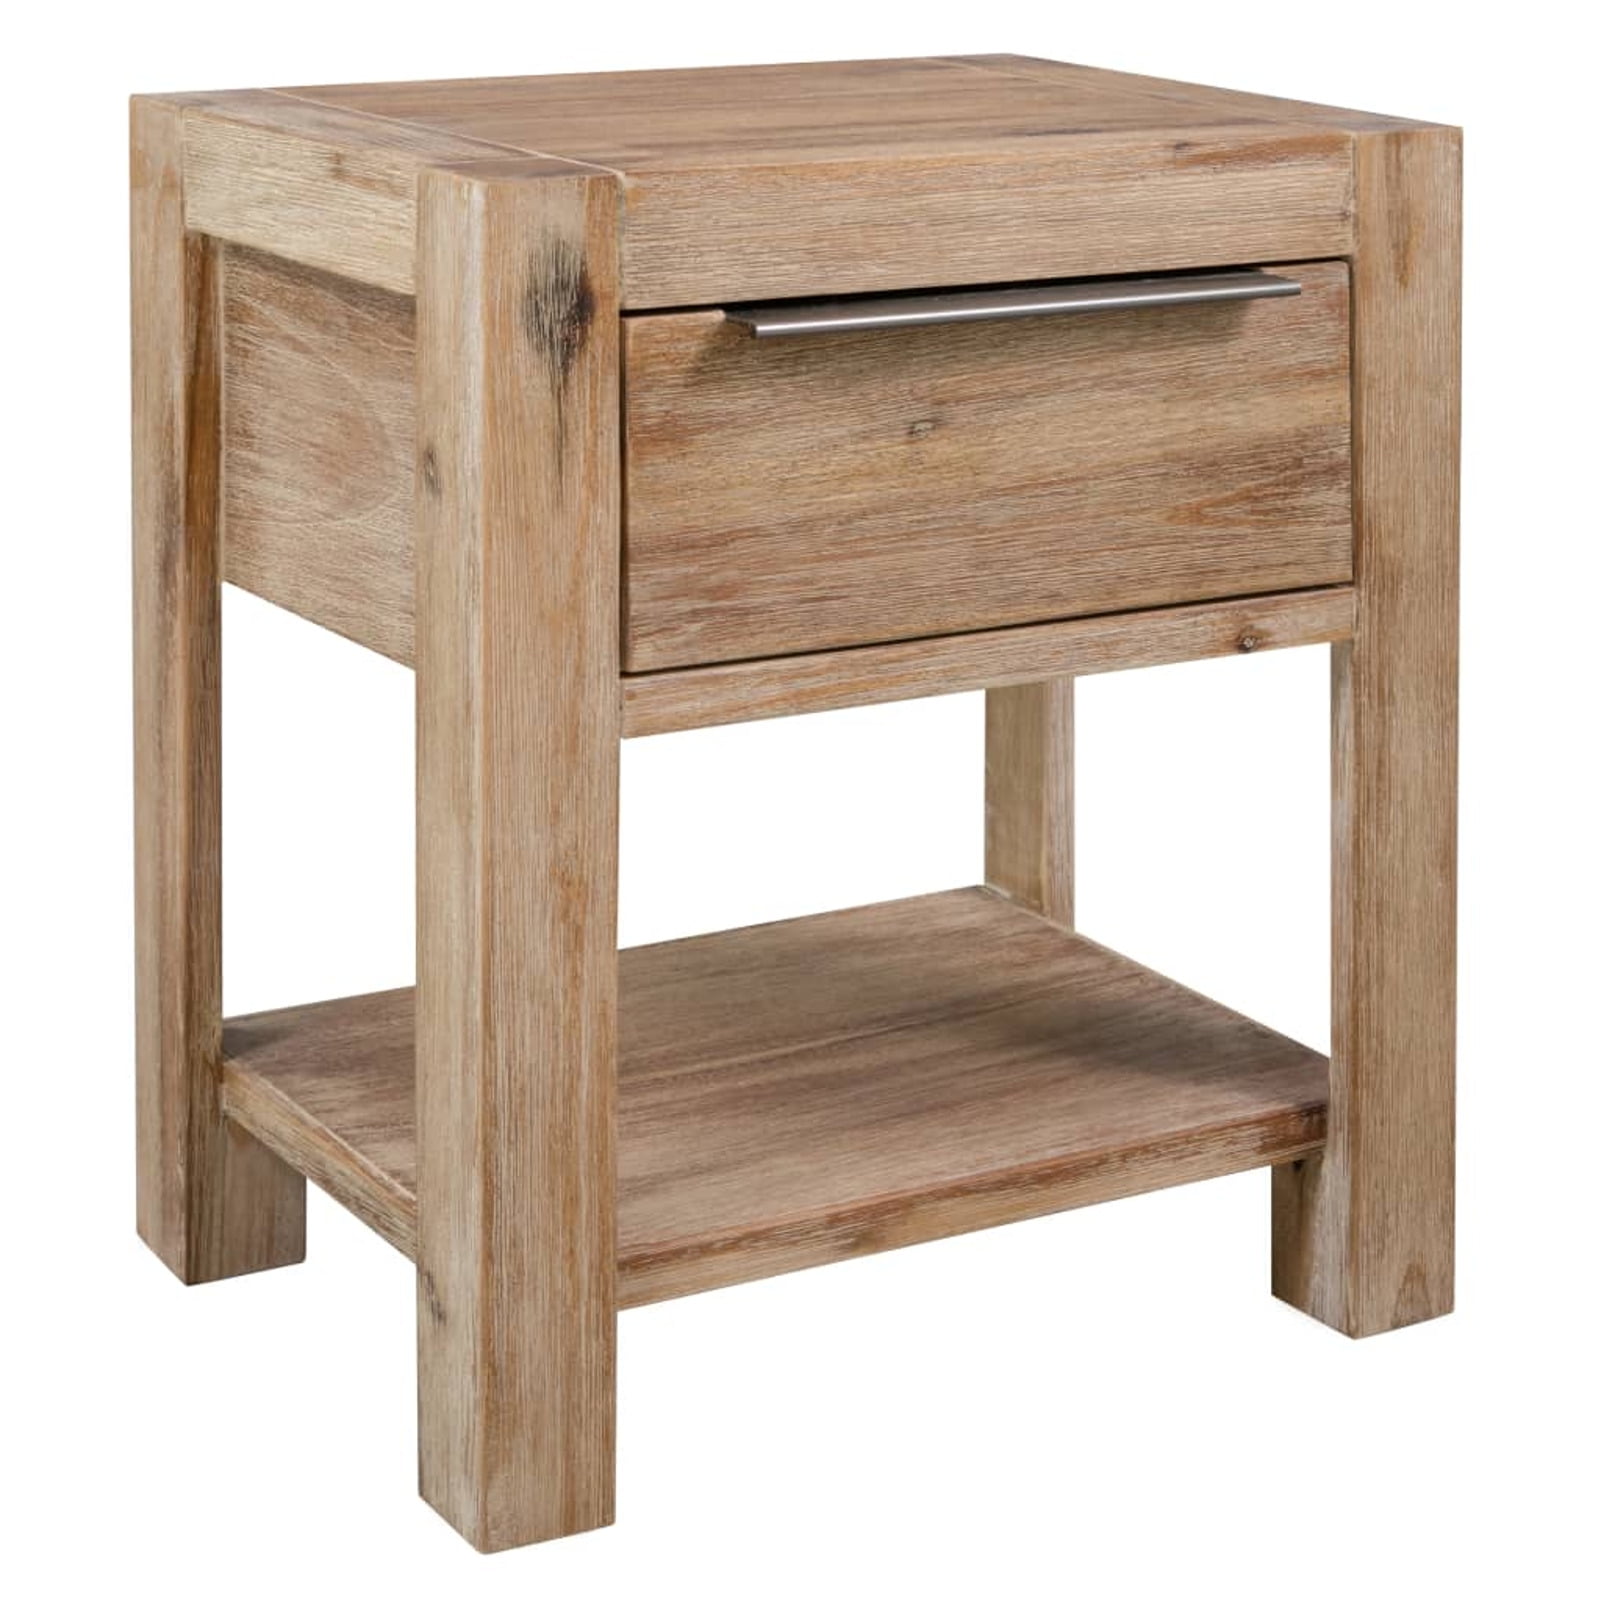 Details about   High Quality Sturdy Nightstand Night Table with Open Shelf Rustic Brown Black 